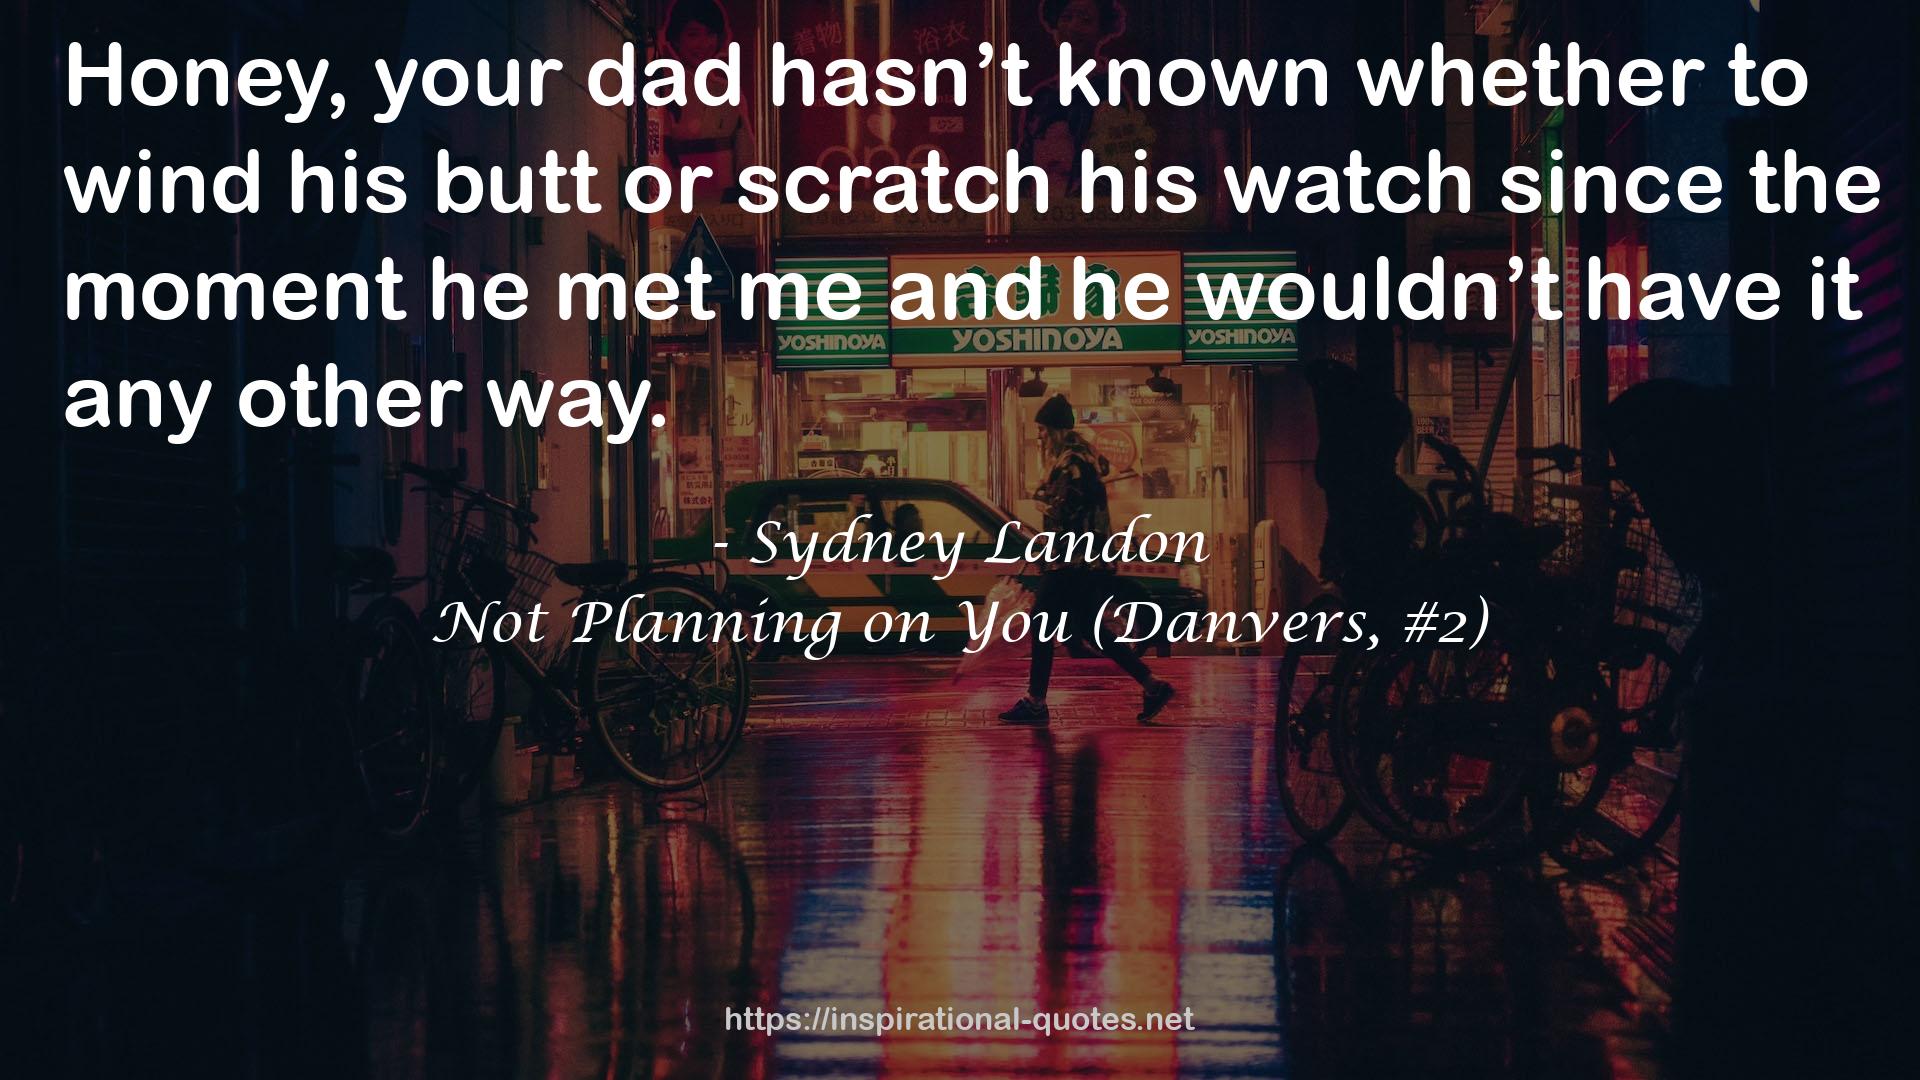 Not Planning on You (Danvers, #2) QUOTES